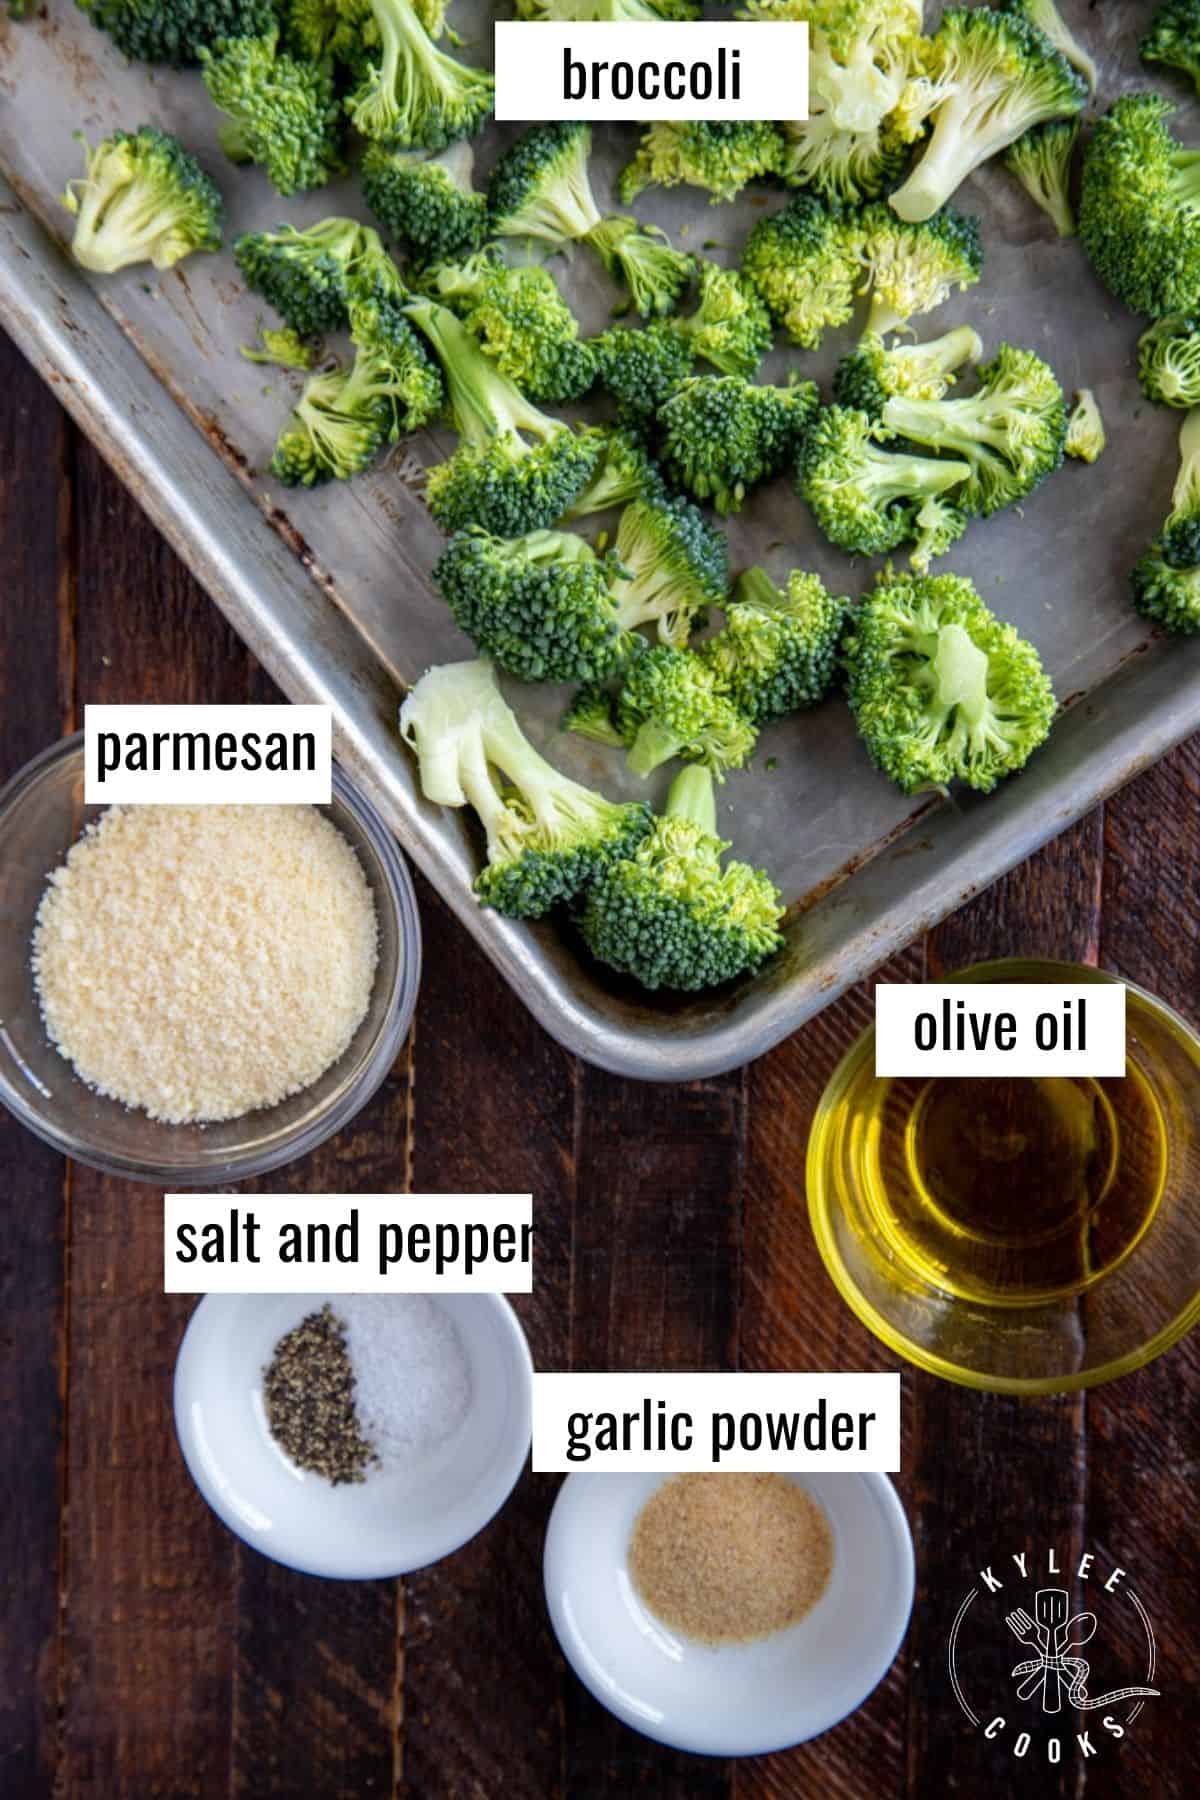 roasted broccoli ingredients laid out